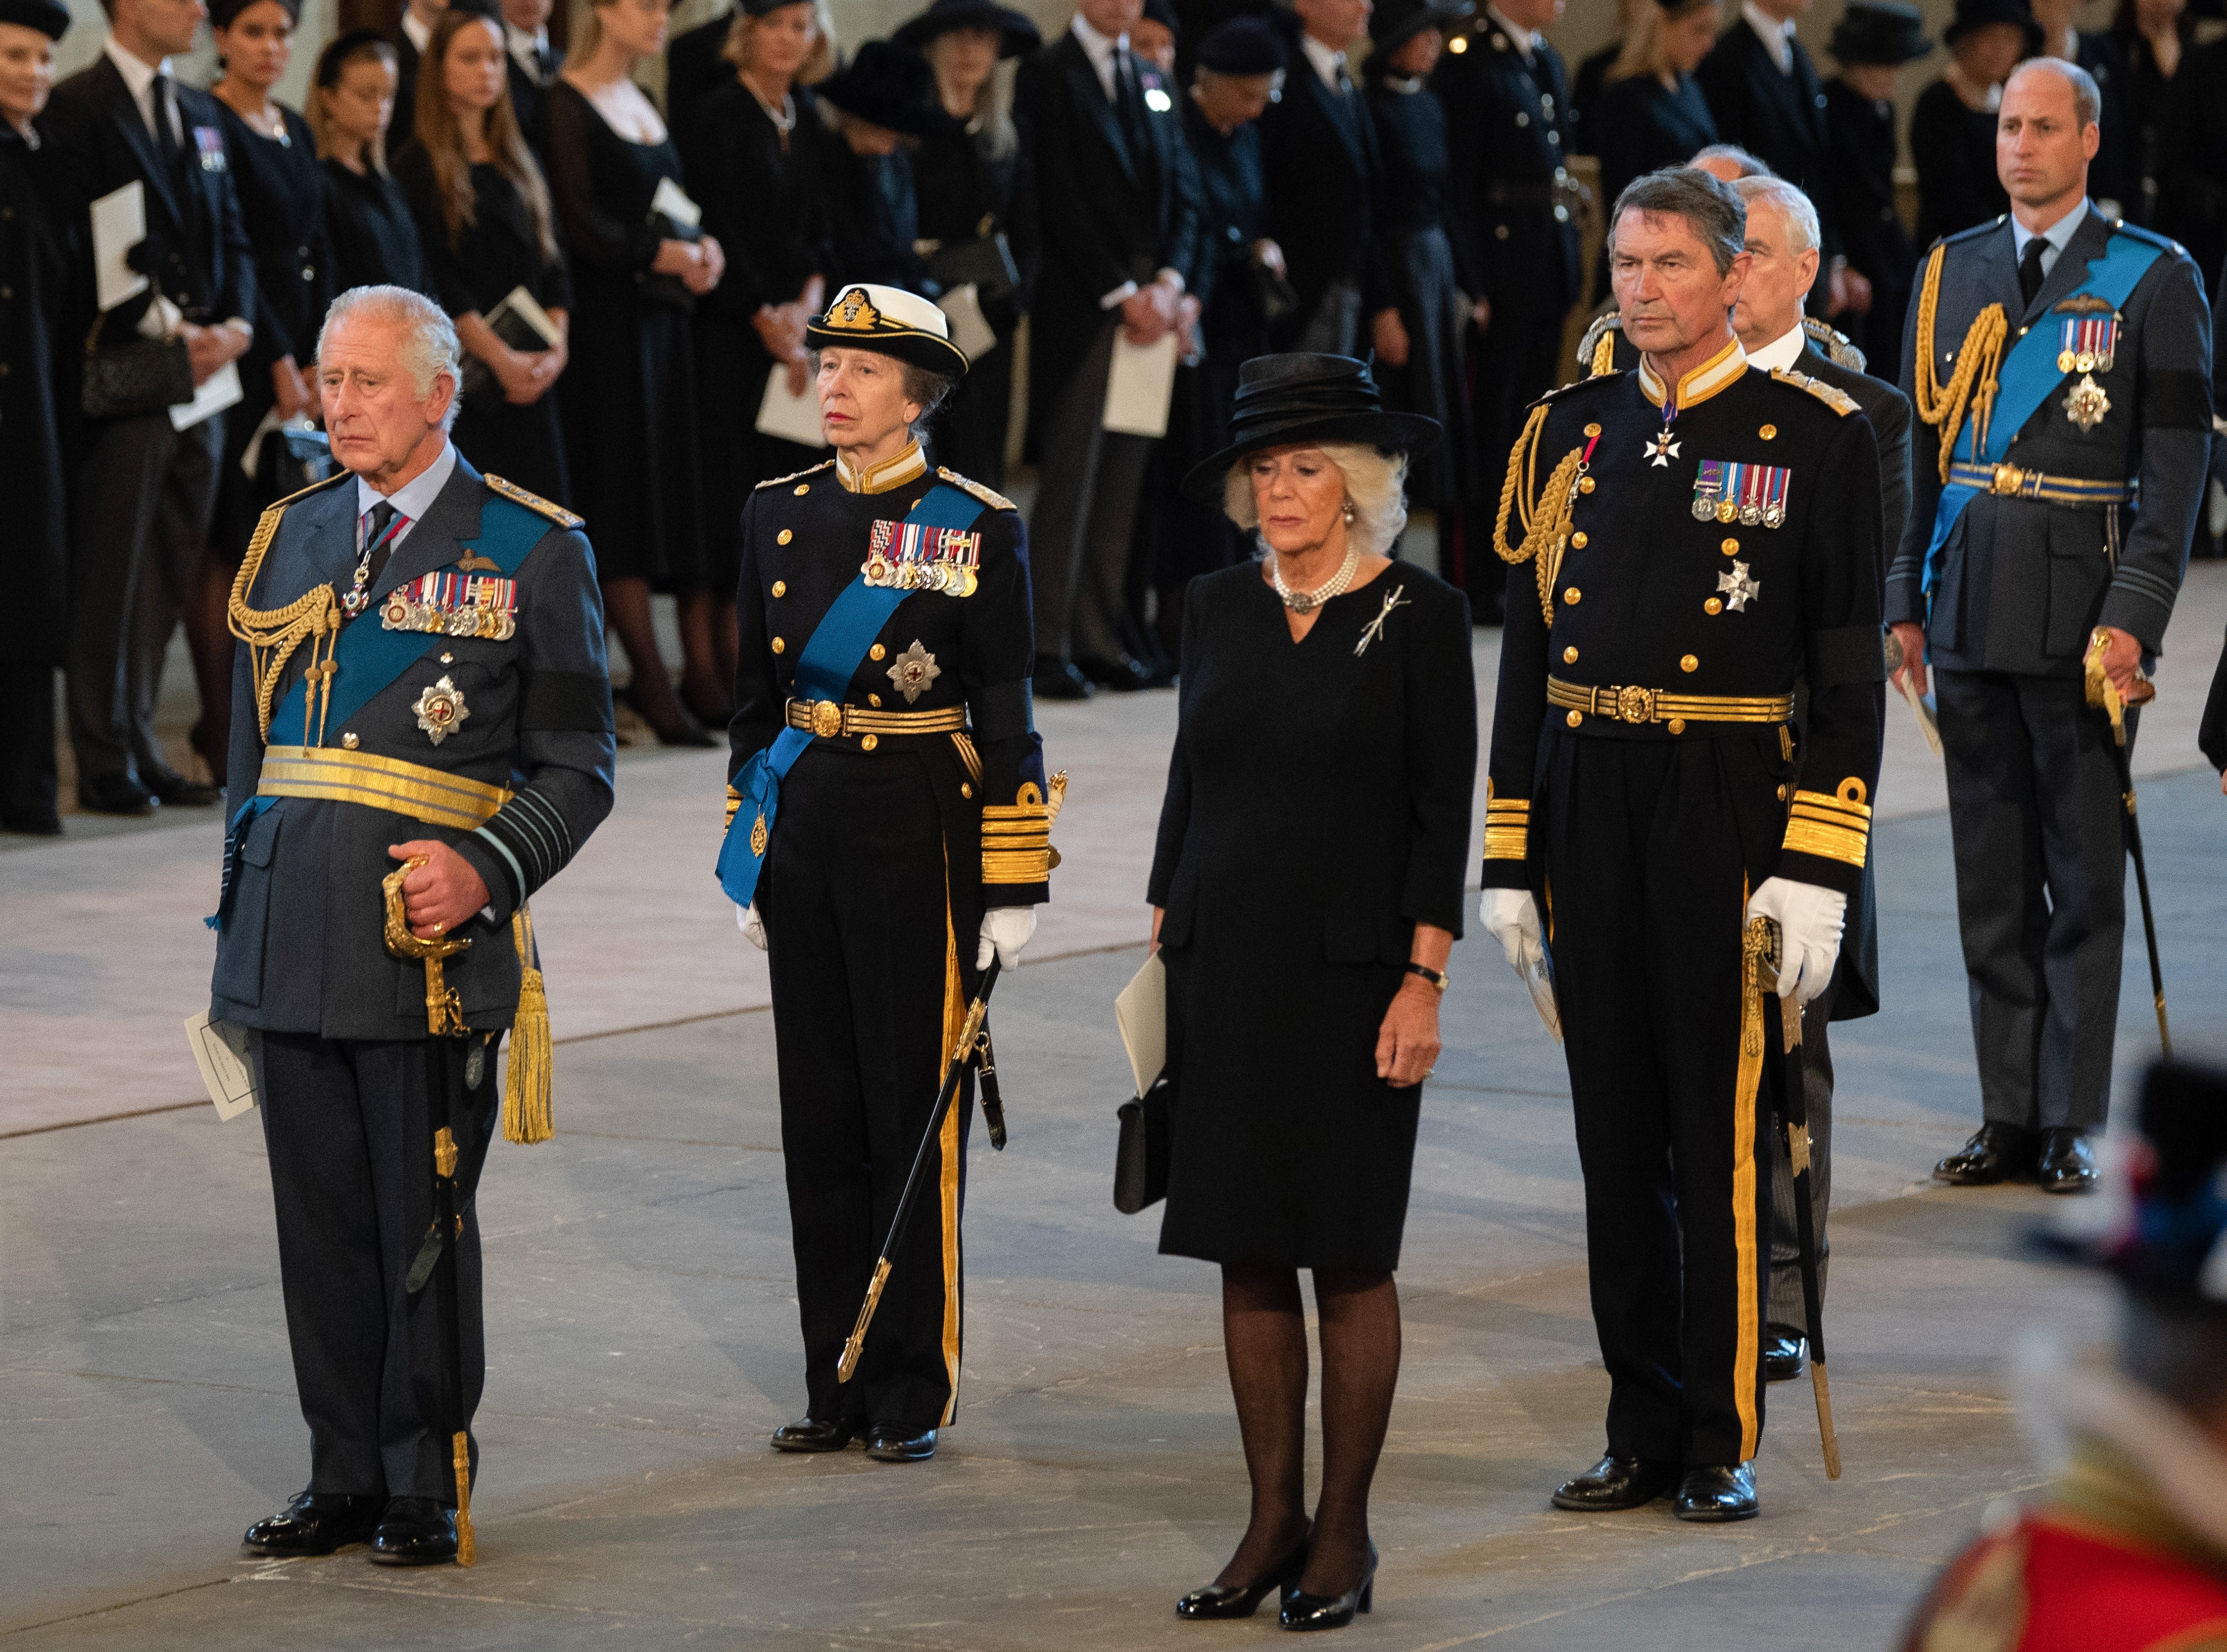 LONDON, ENGLAND - SEPTEMBER 14: King Charles III, Anne, Princess Royal, Camilla, Queen Consort, Vice Admiral Sir Timothy Laurence, Prince Andrew, Duke of York and Prince William, Prince of Wales pay their respects in The Palace of Westminster during the p (Foto: Getty Images)